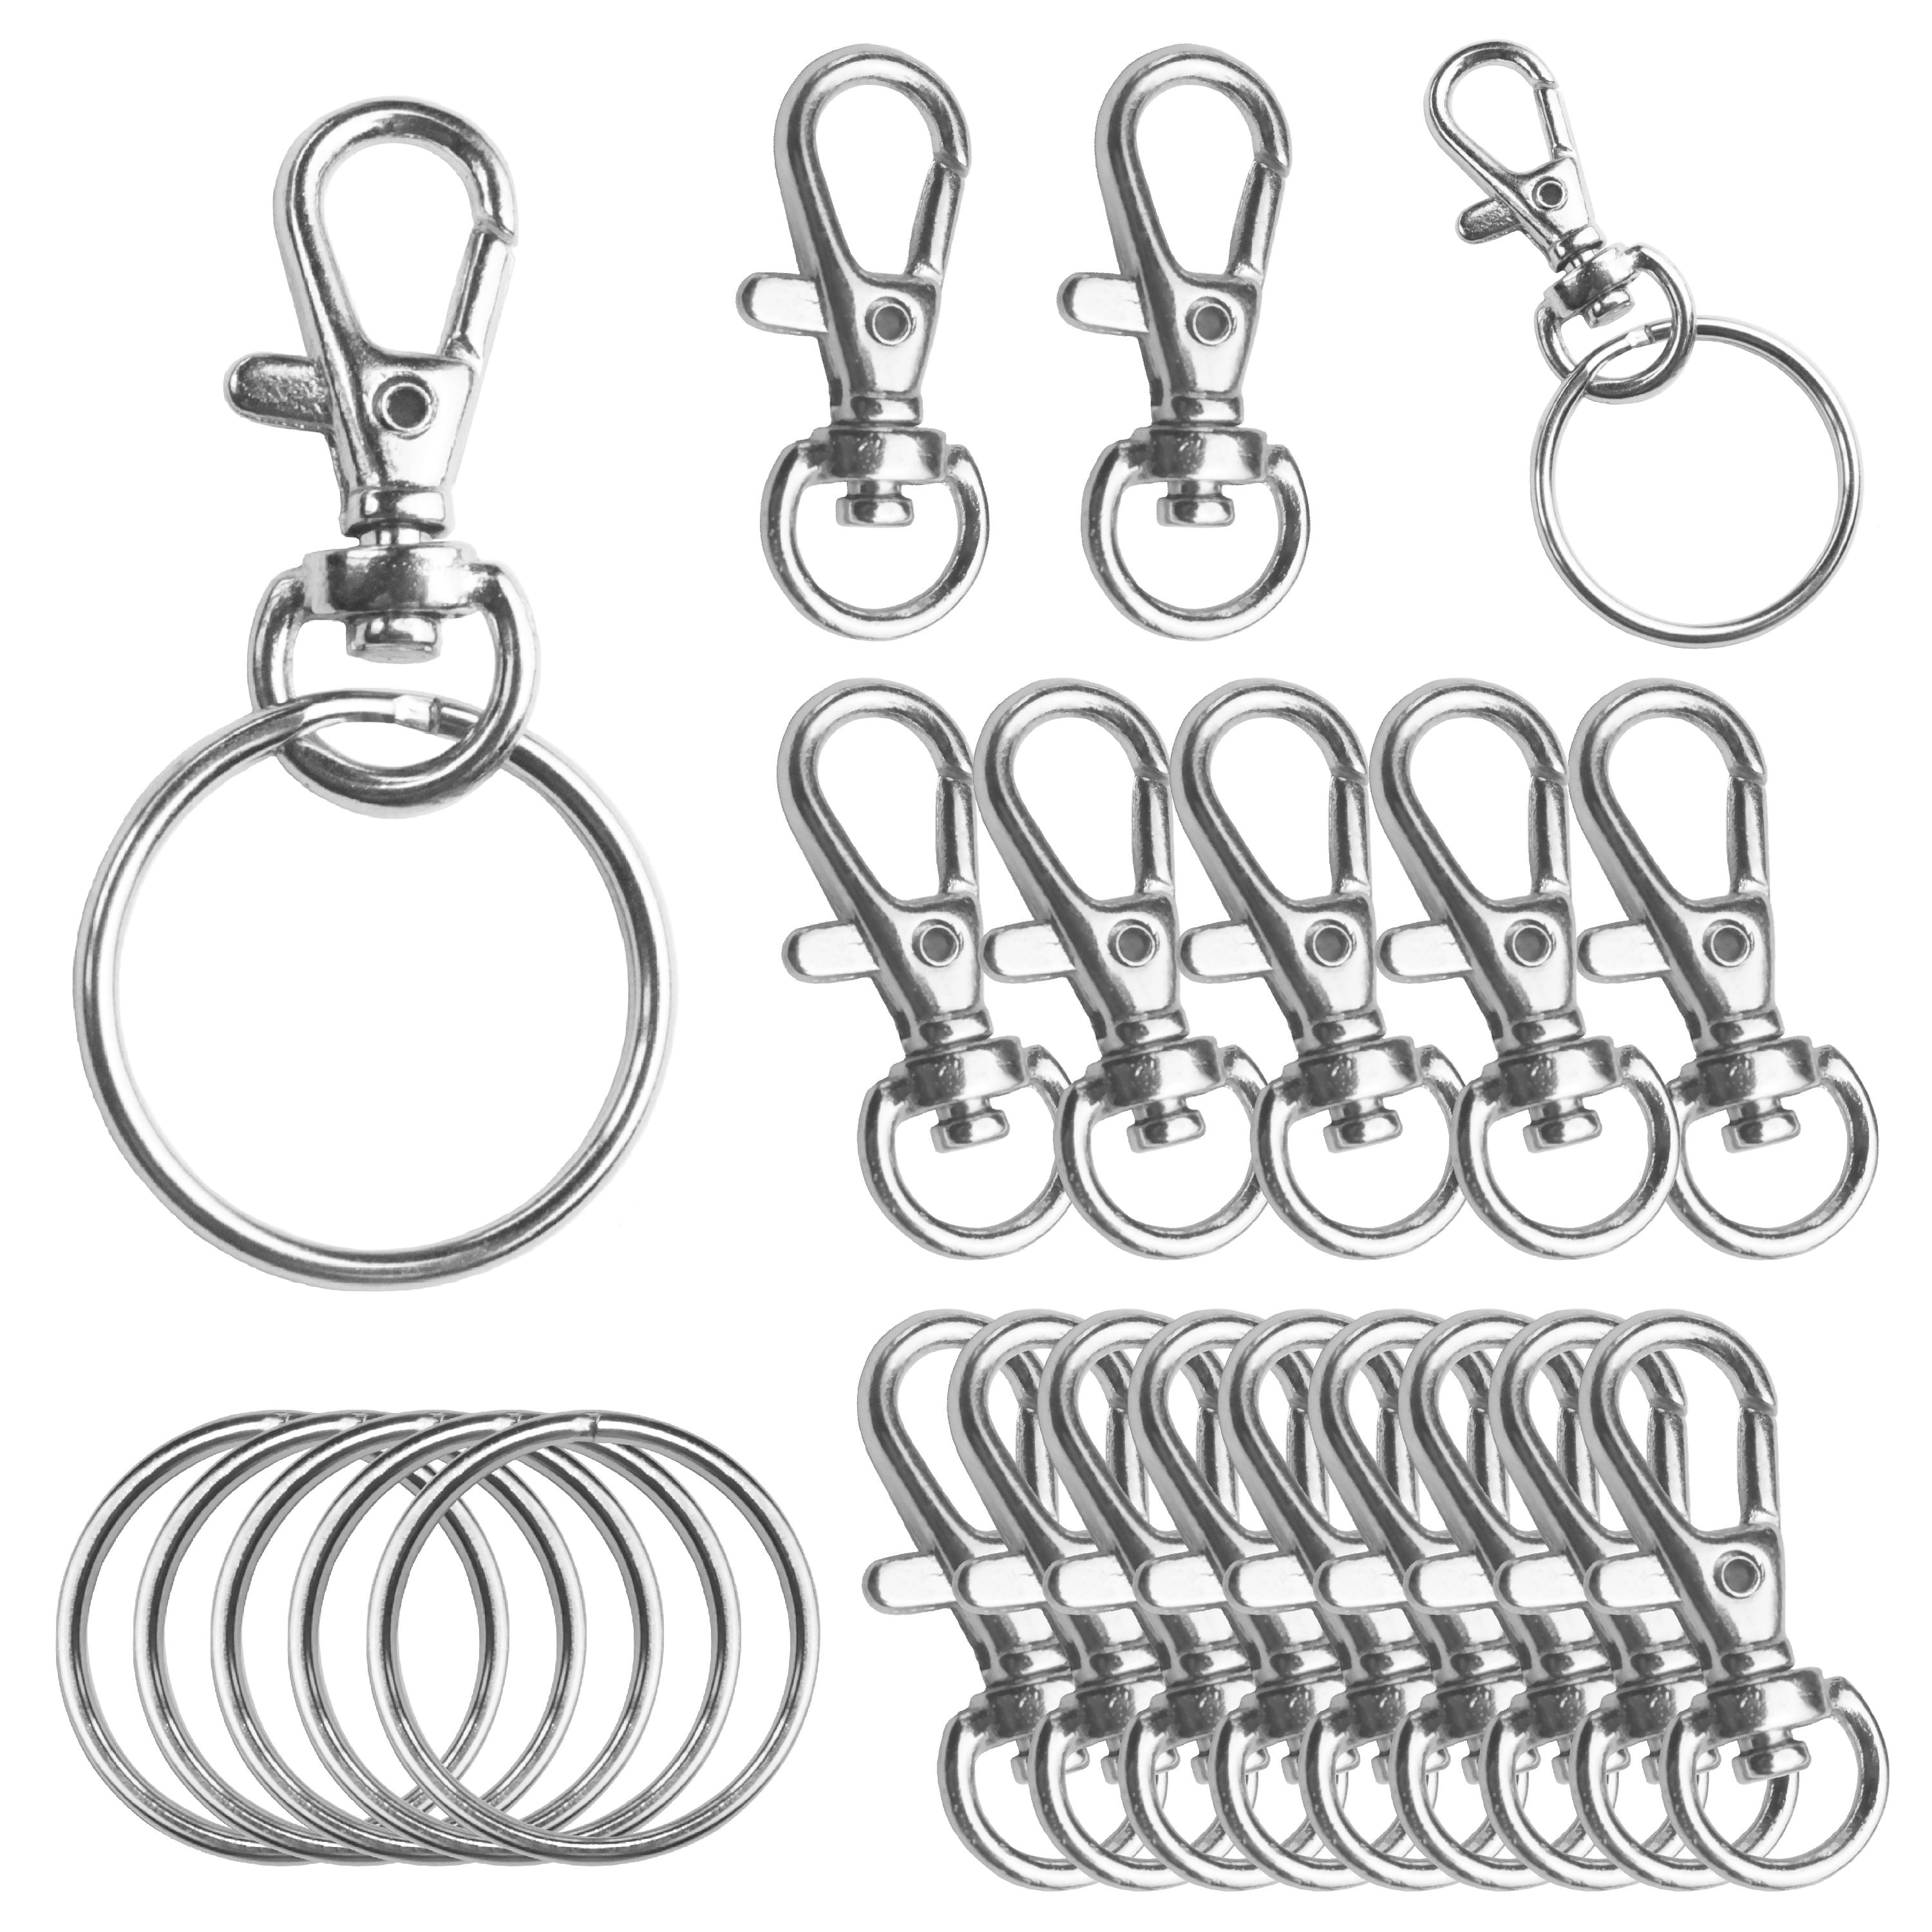 5pcs/lot Metal Swivel Hooks Lobster Claw Clasps, Split Keychain Rings Part  with Chain for Lanyard Supplies